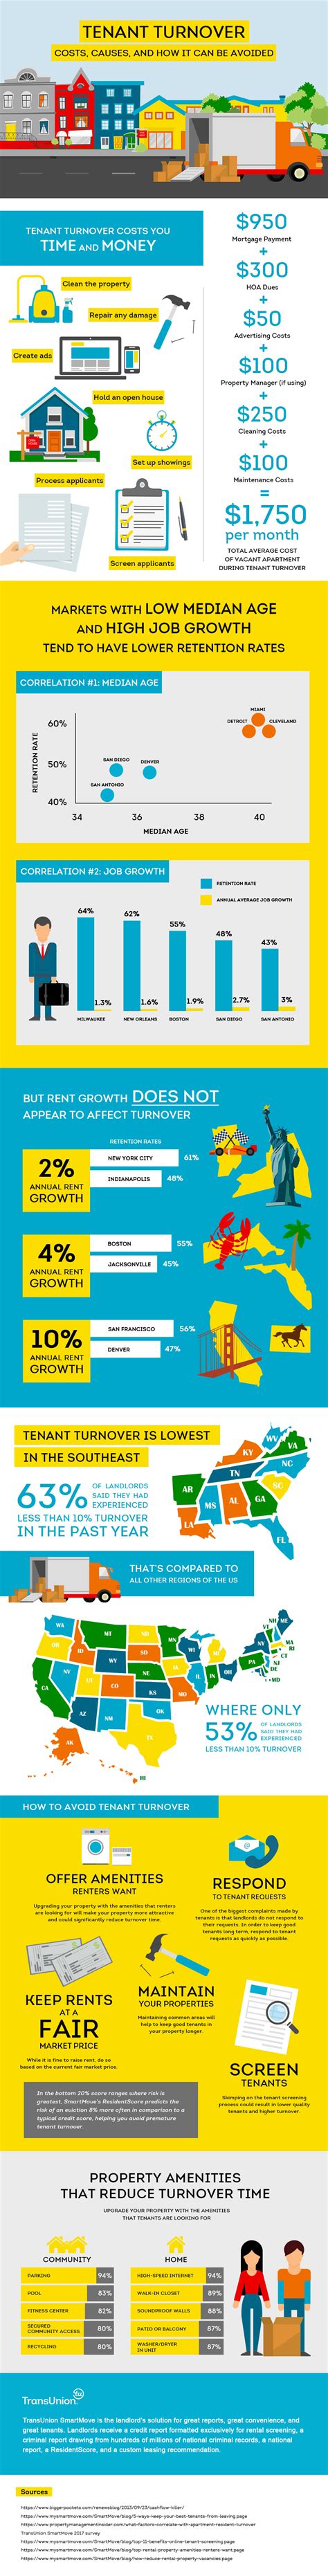 tenant turnovers costs retention and how to make more